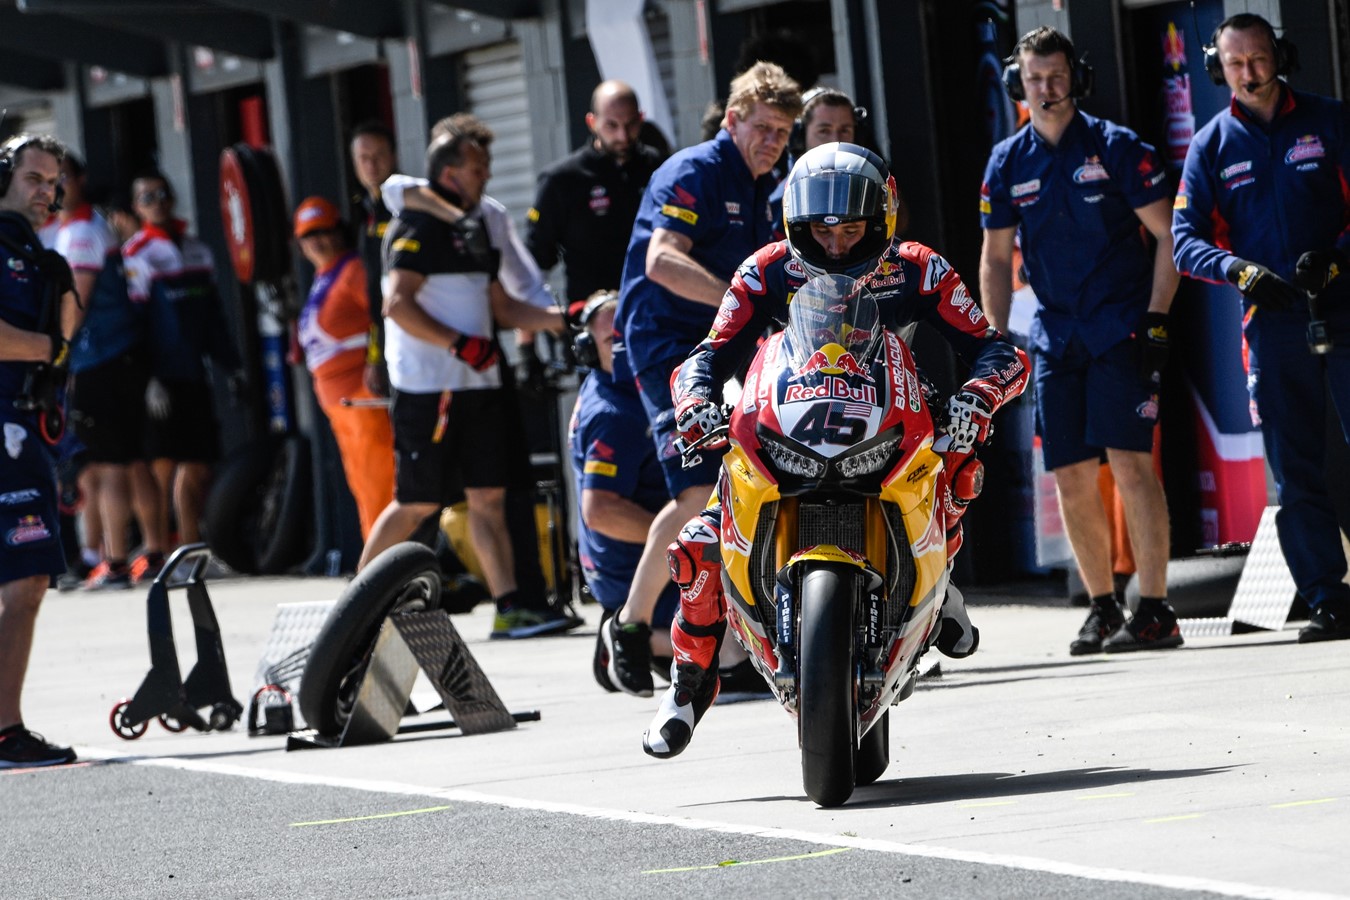 Camier sixth in epic Race 2 battle at Phillip Island